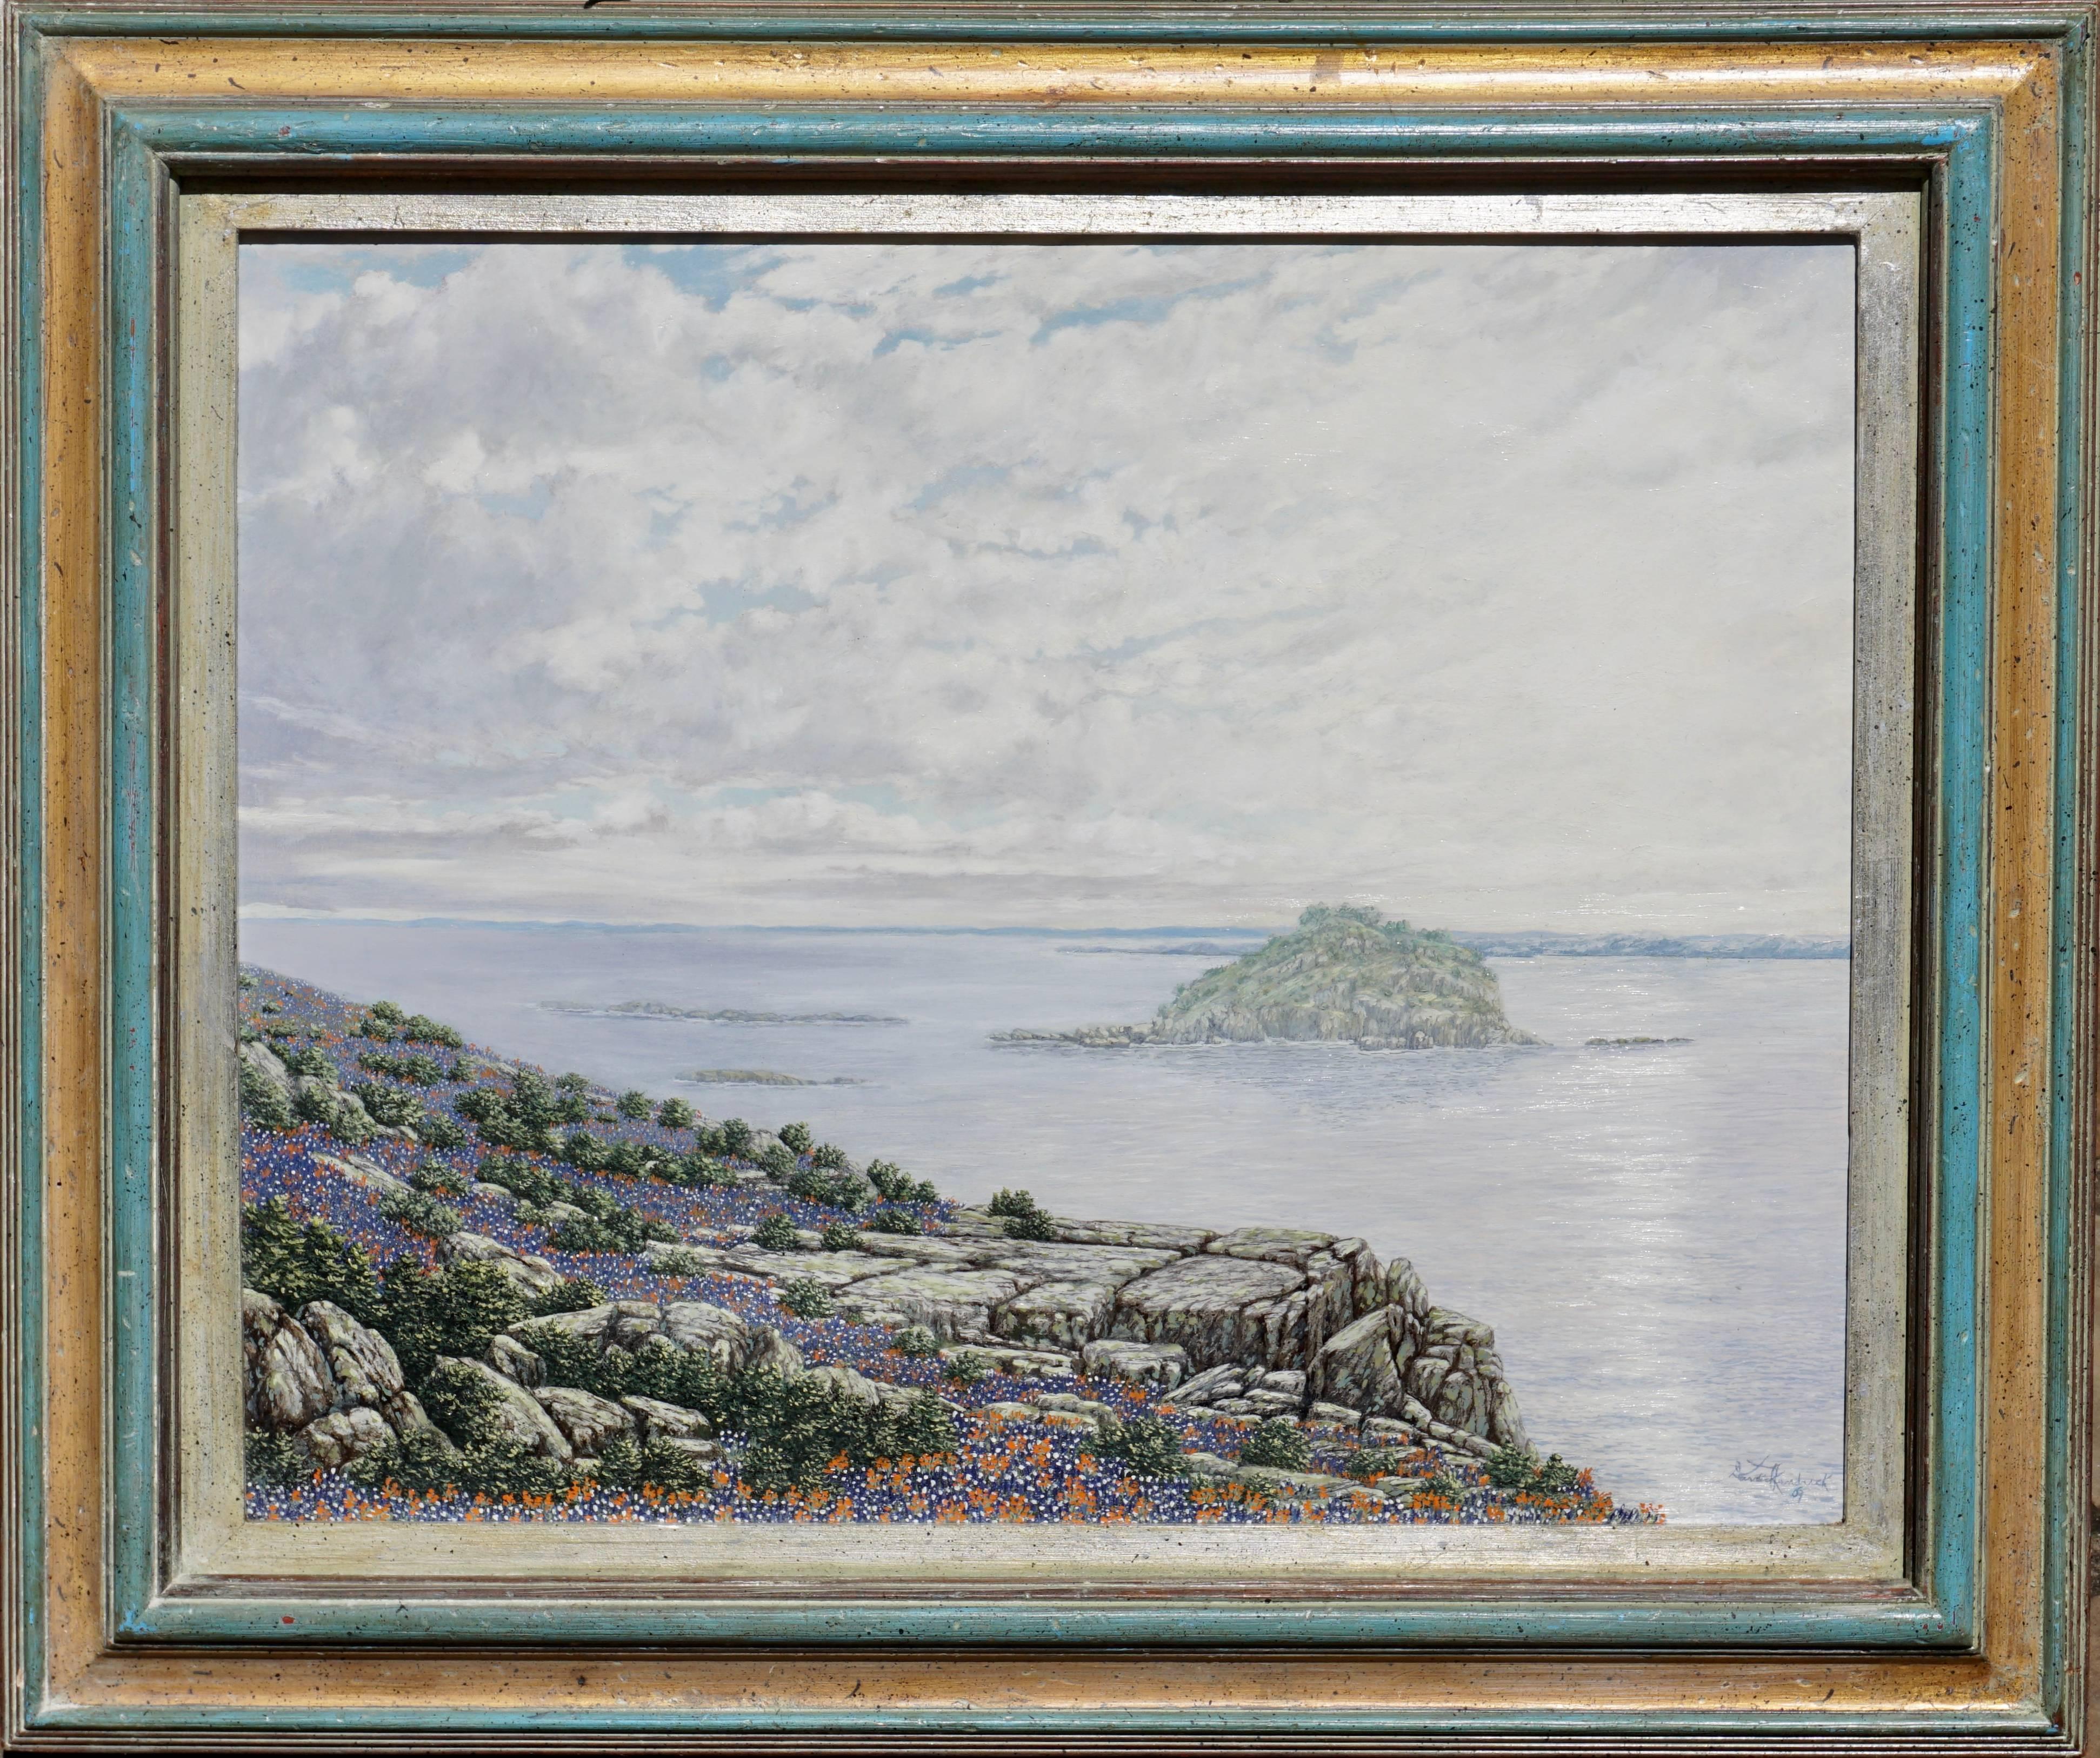 Daniel Kendrick Texas “Bluffs On Lake Texoma” 1969 oil painting. One of Texas’s most prolific landscape artists; Daniel shows his genius on this vintage early painting. Oil on panel. You can almost see the bluebonnet pedals and all the ripples and